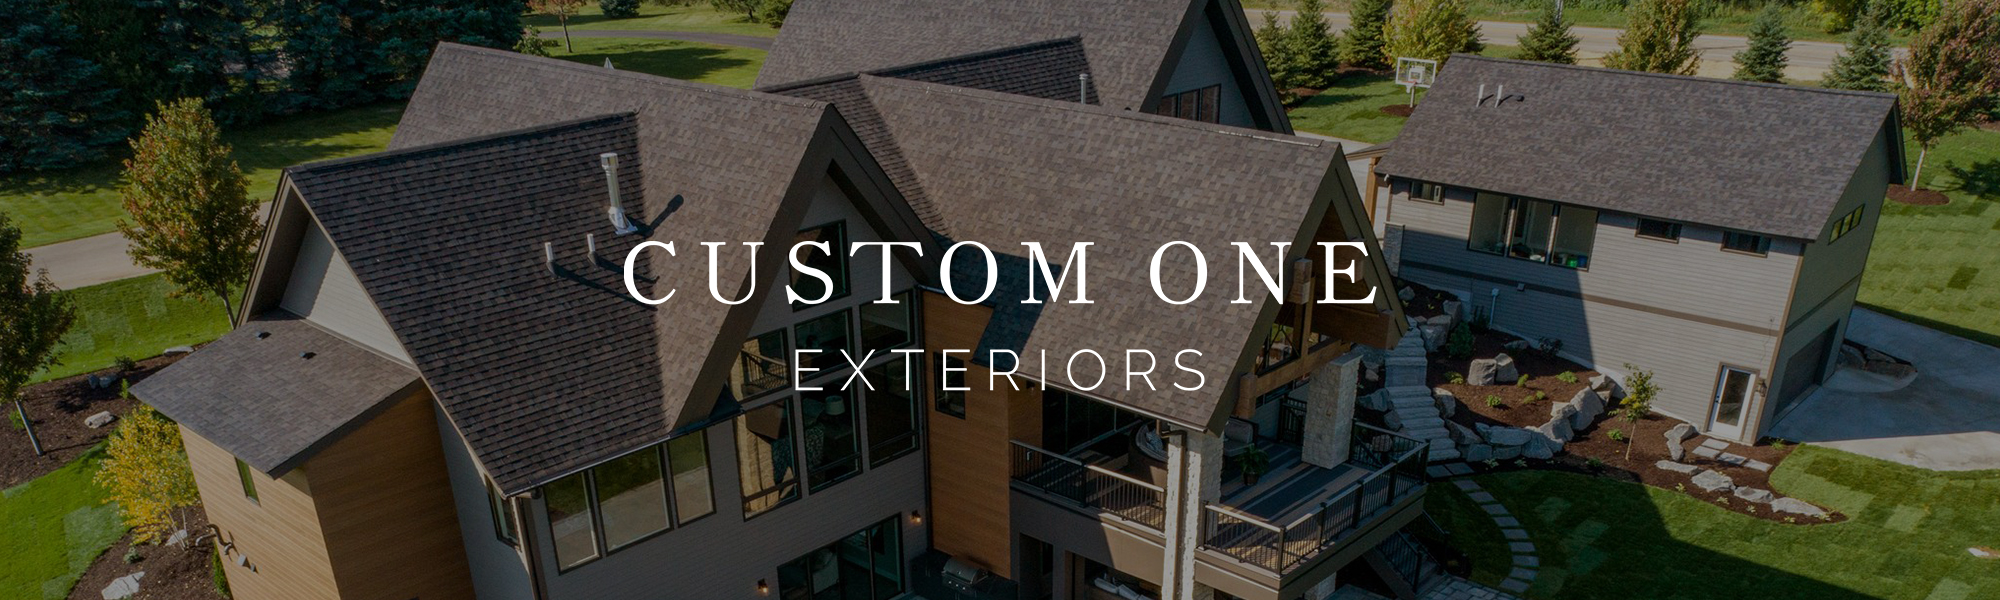 Custom One Exteriors - Roofing Installation